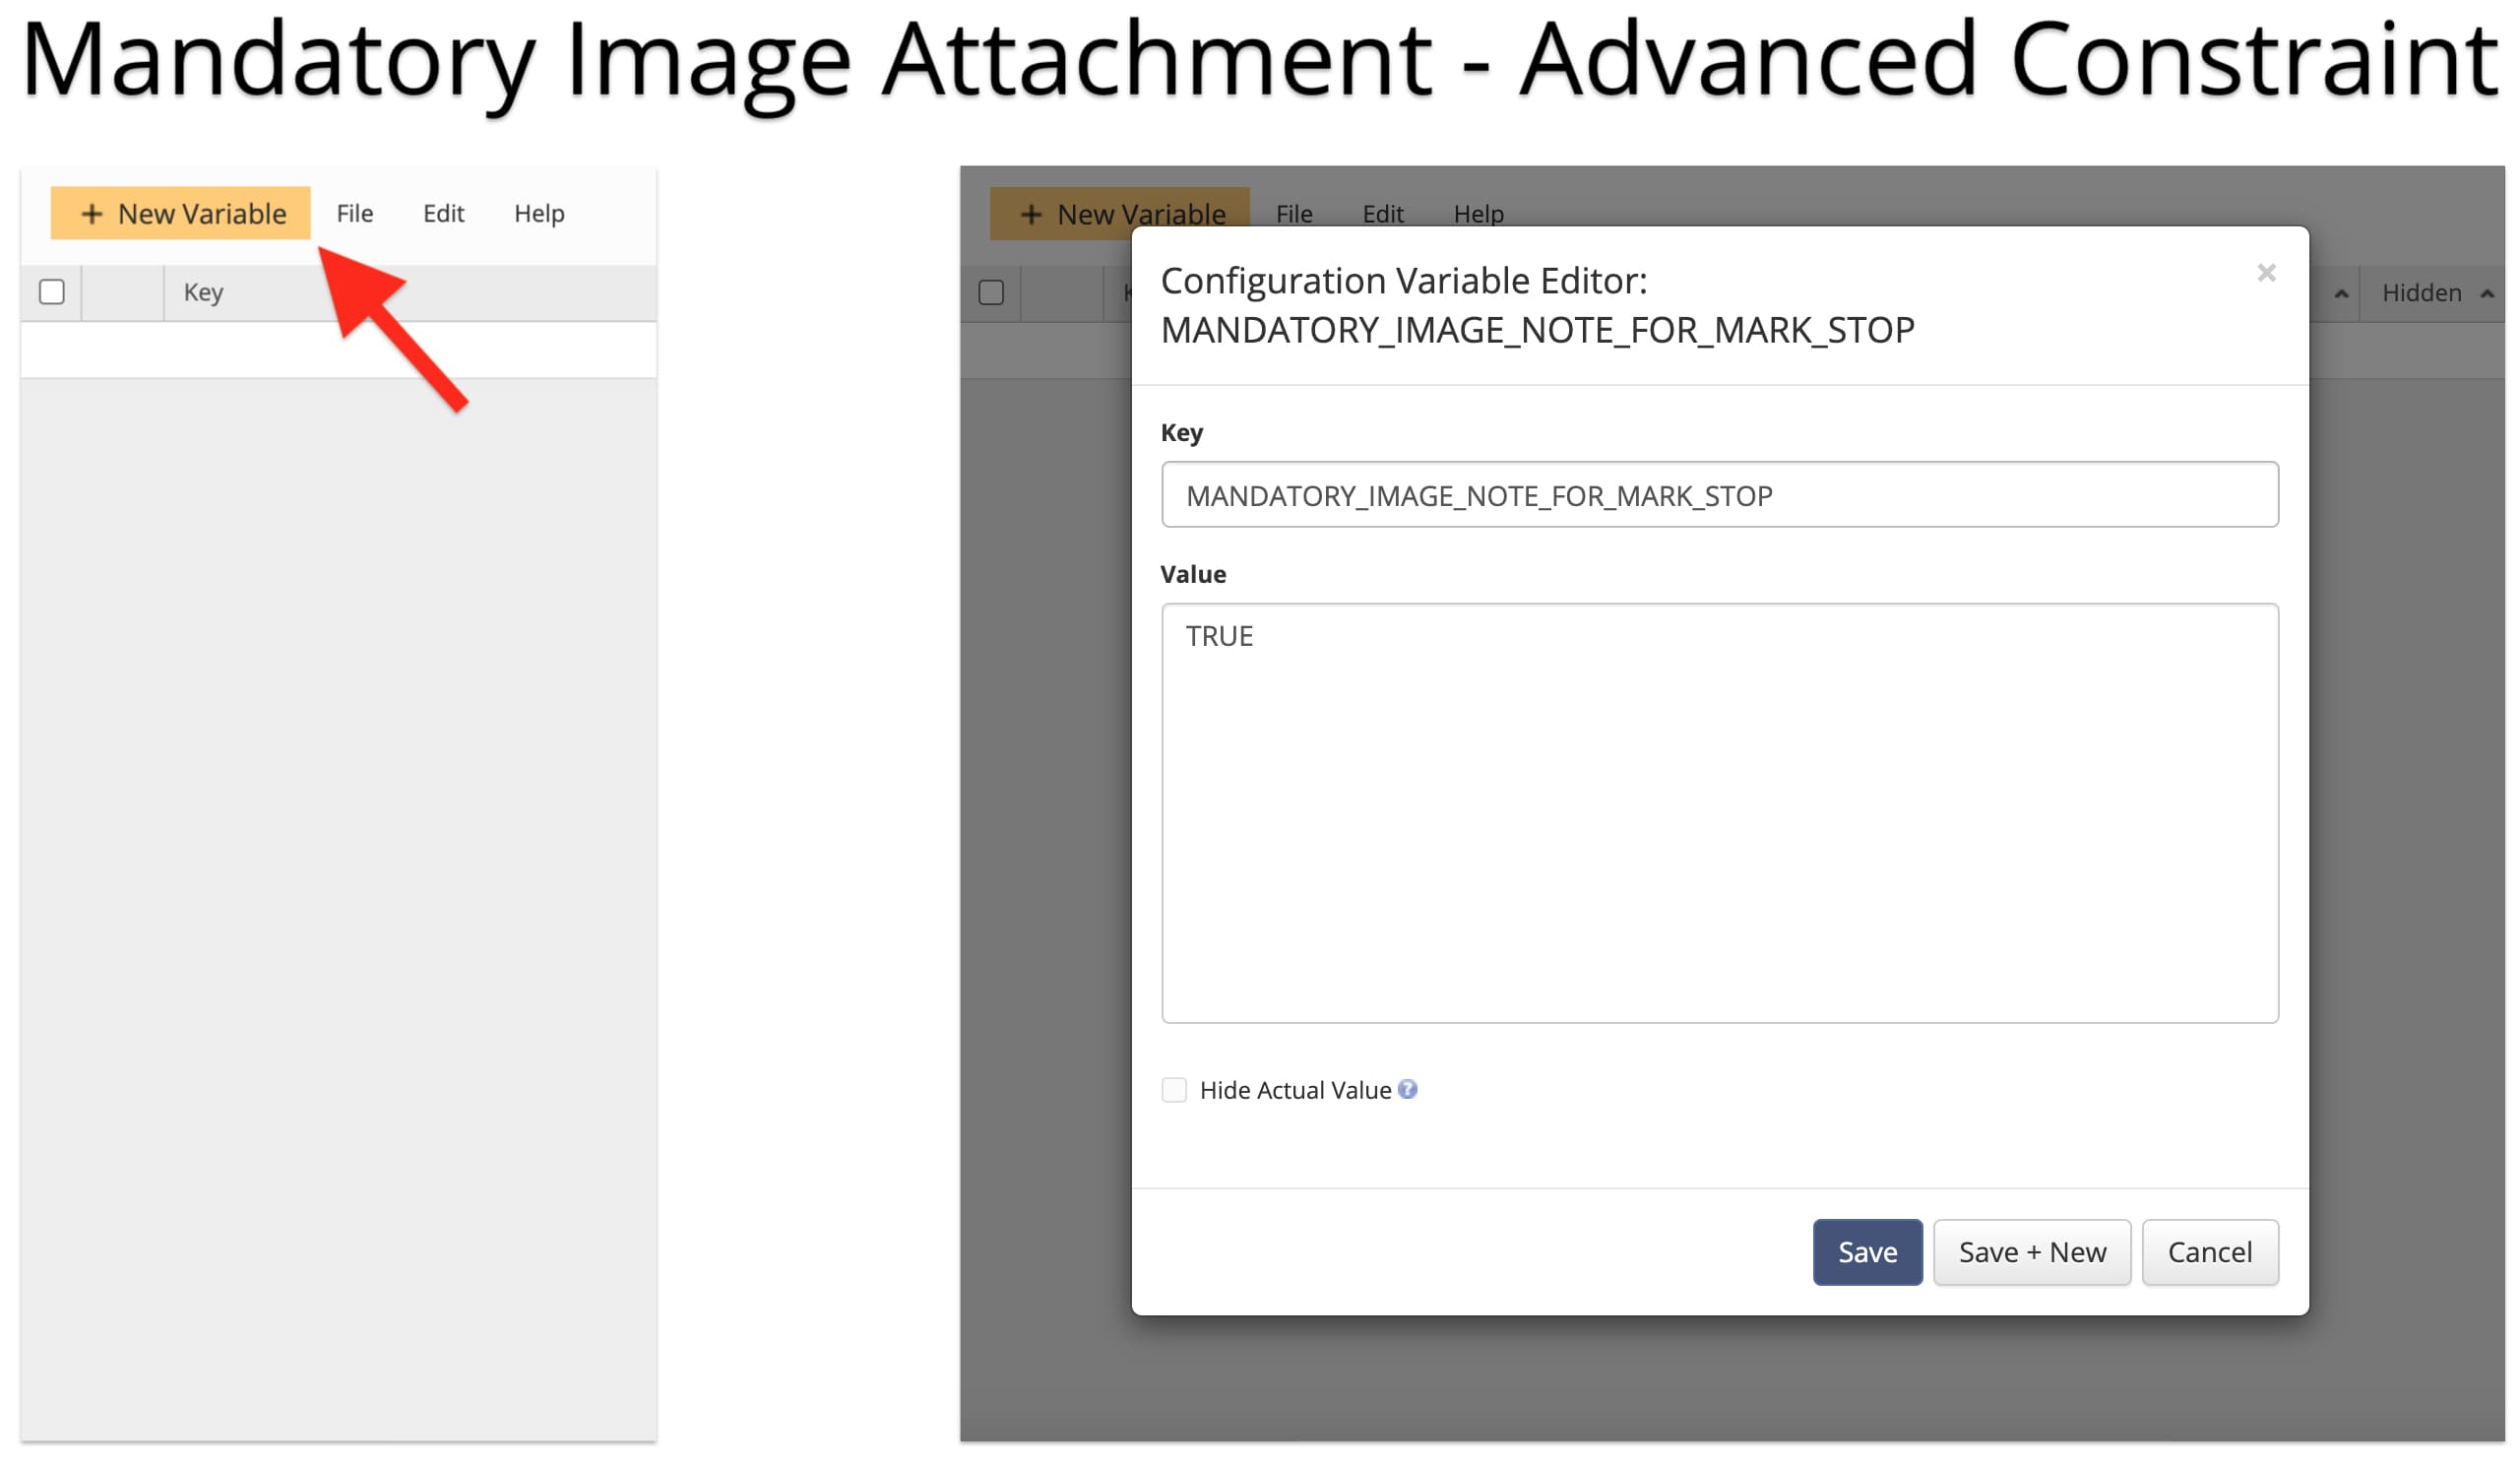 Enable mandatory image attachment and POD collection in route planner's advanced configurations.